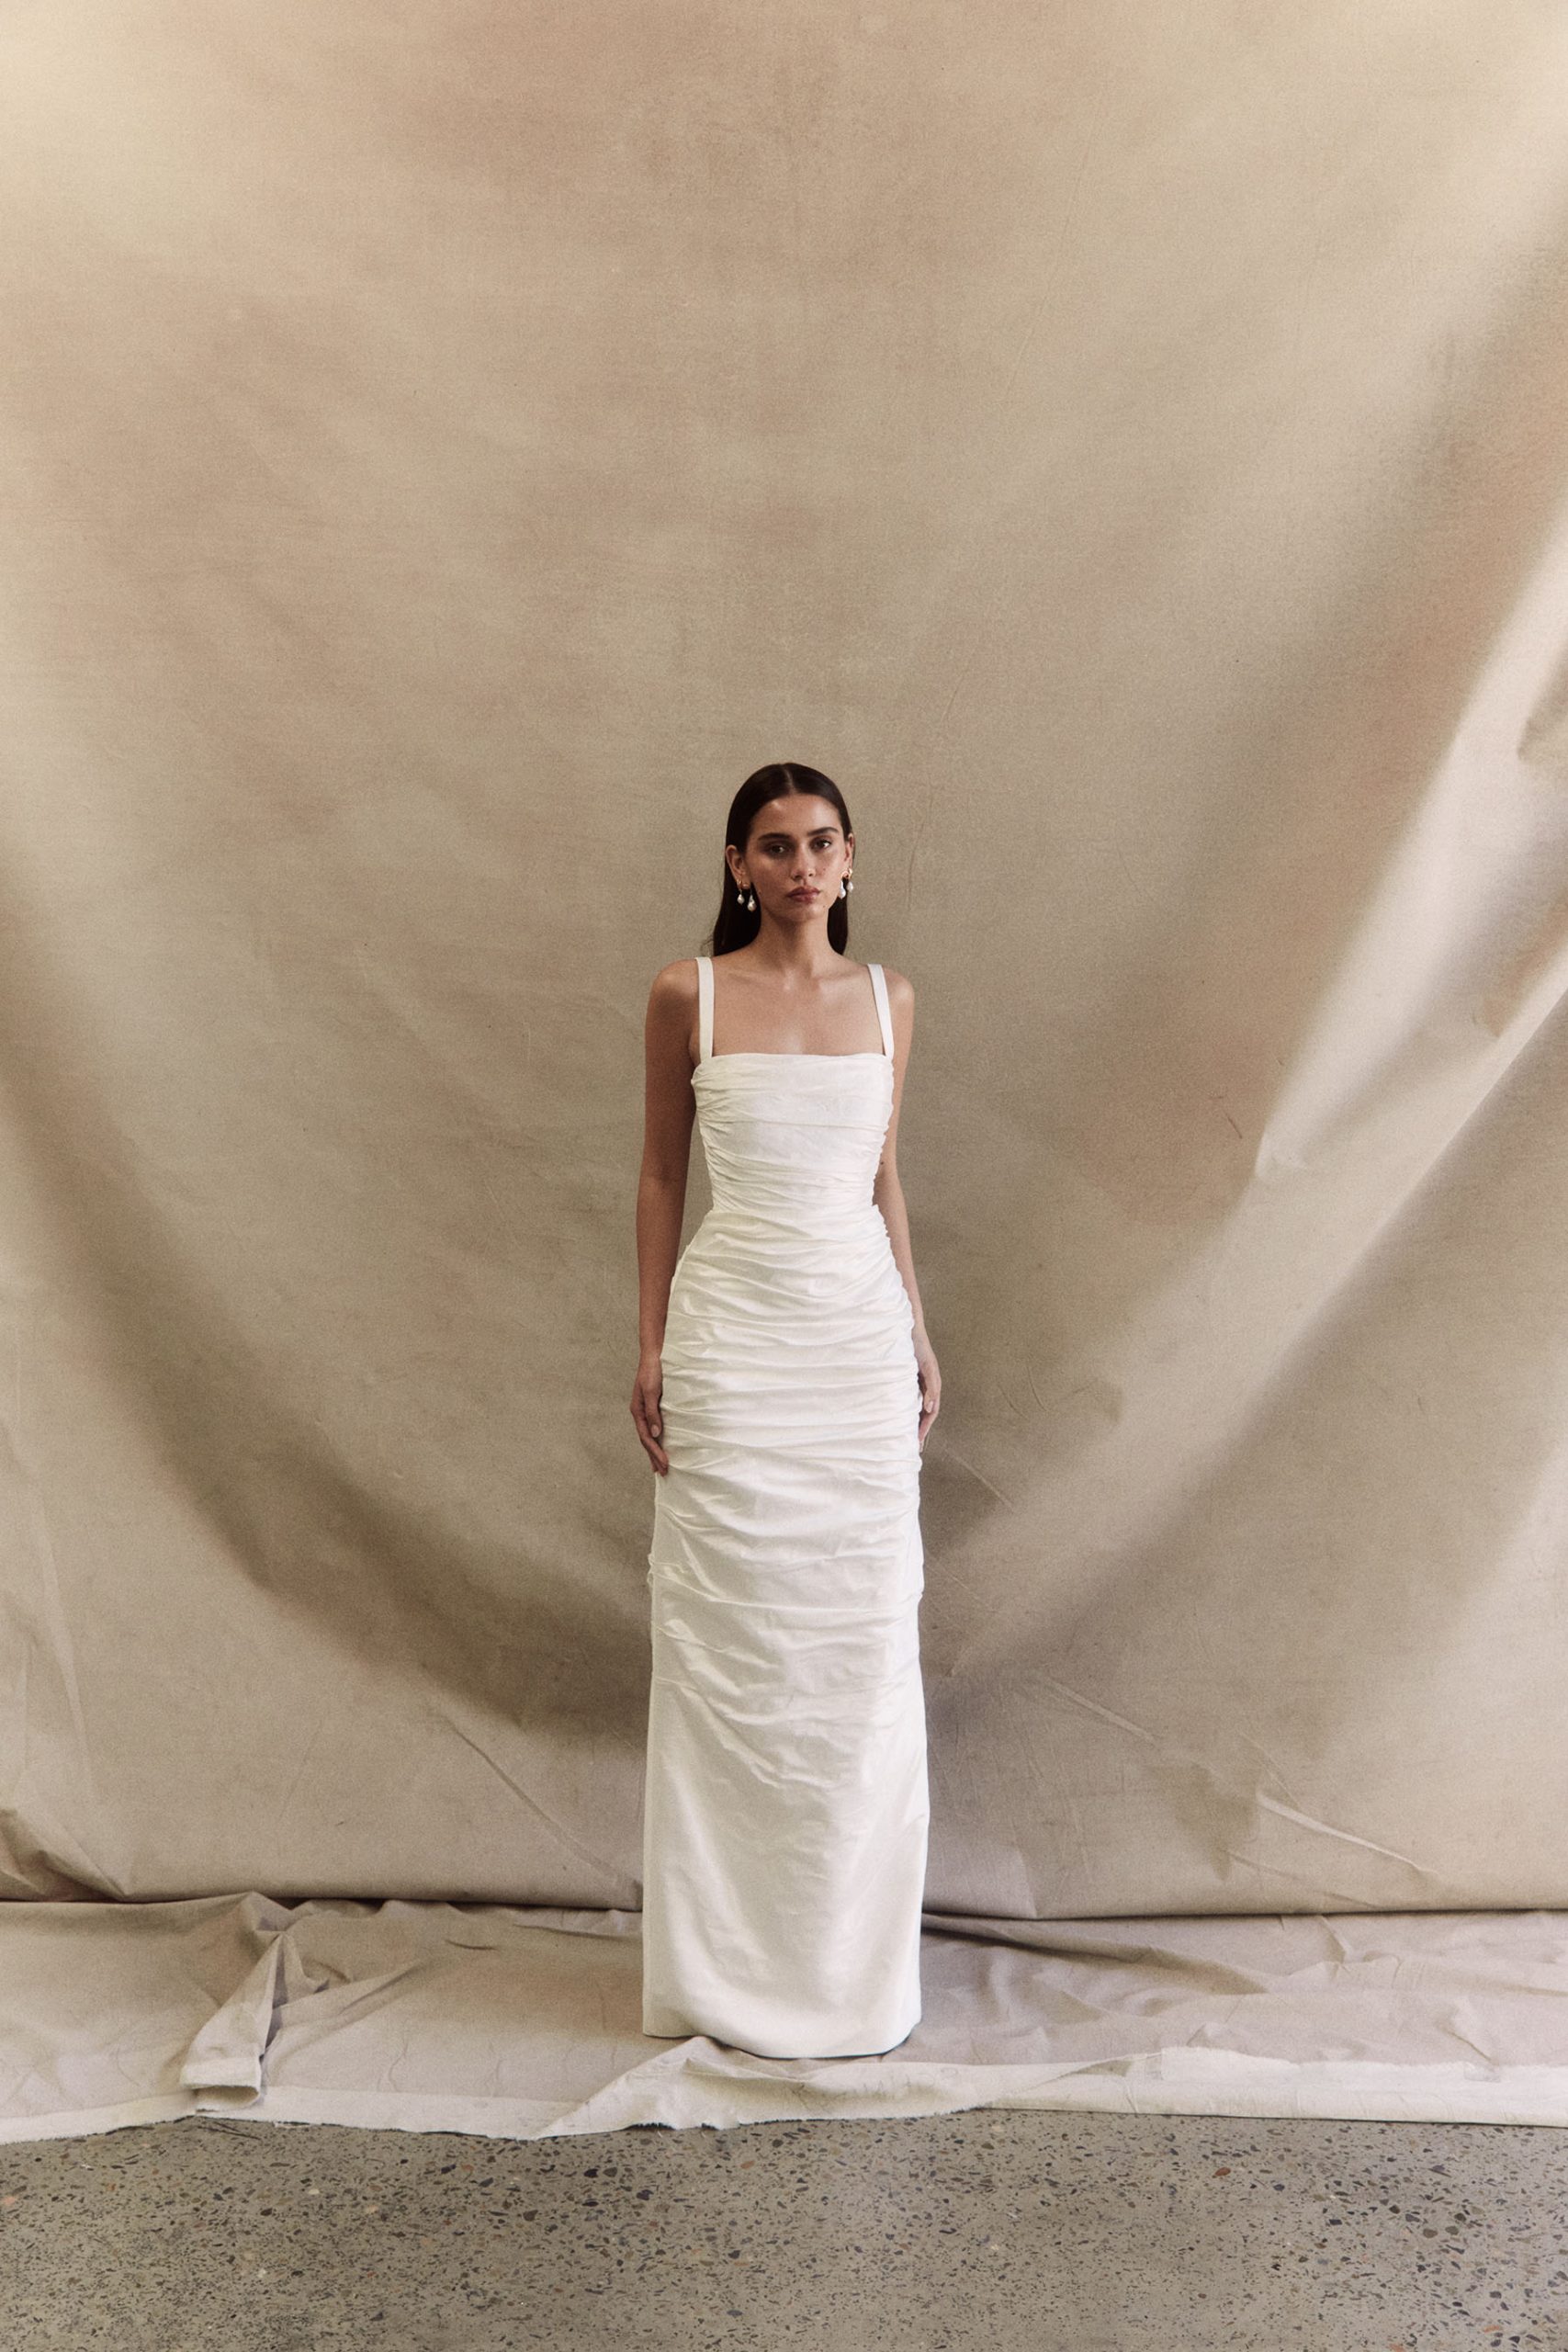 20 Short Wedding Dresses You Need To Know About - Wedshed